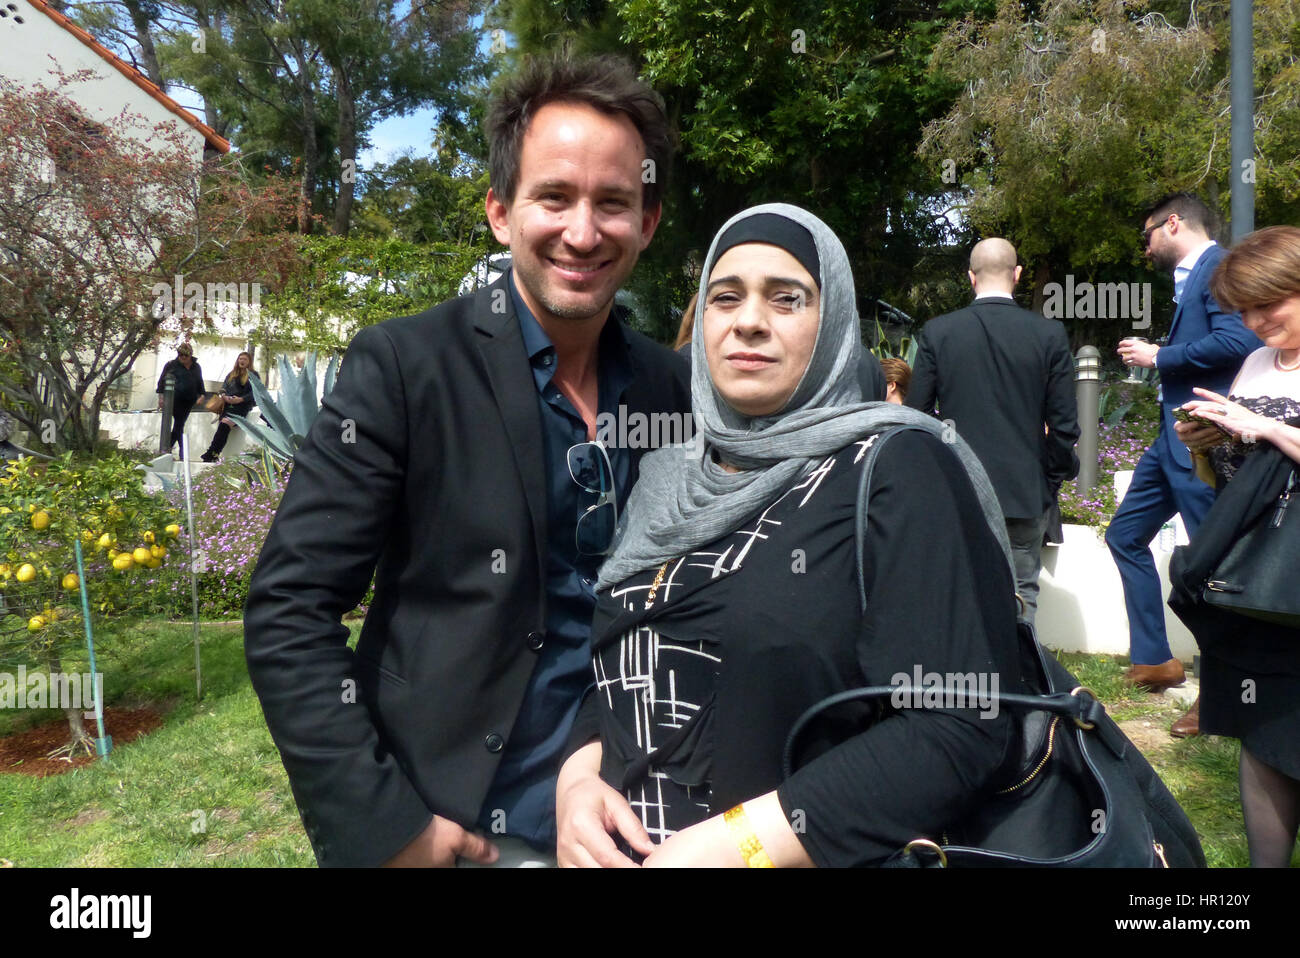 Los Angeles, US. 25th Feb, 2017. Documentary film maker Marcel Mettelsiefen and Hala Kamil from Syria, the central figure of his refugee documentary 'Watani: My Homeland, photographed during the traditional reception for the German Oscar nominees at the historical Villa Aurora in Los Angeles, US, 25 February 2017. The Academy Award ceremony takes place on 26 February 2017. Photo: Barbara Munker/dpa/Alamy Live News Stock Photo